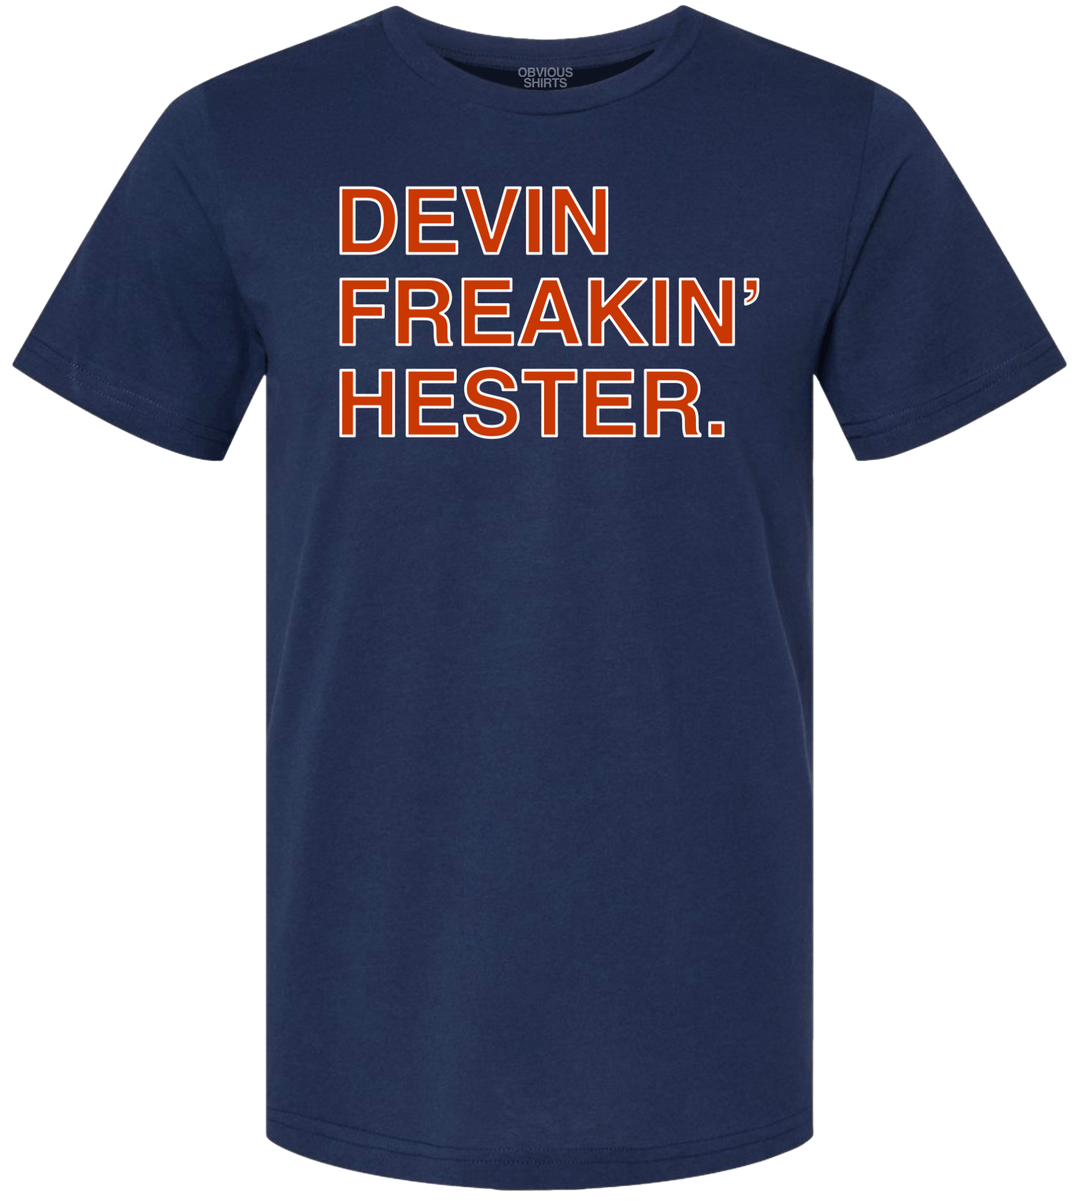 DEVIN FREAKIN' HESTER. - OBVIOUS SHIRTS